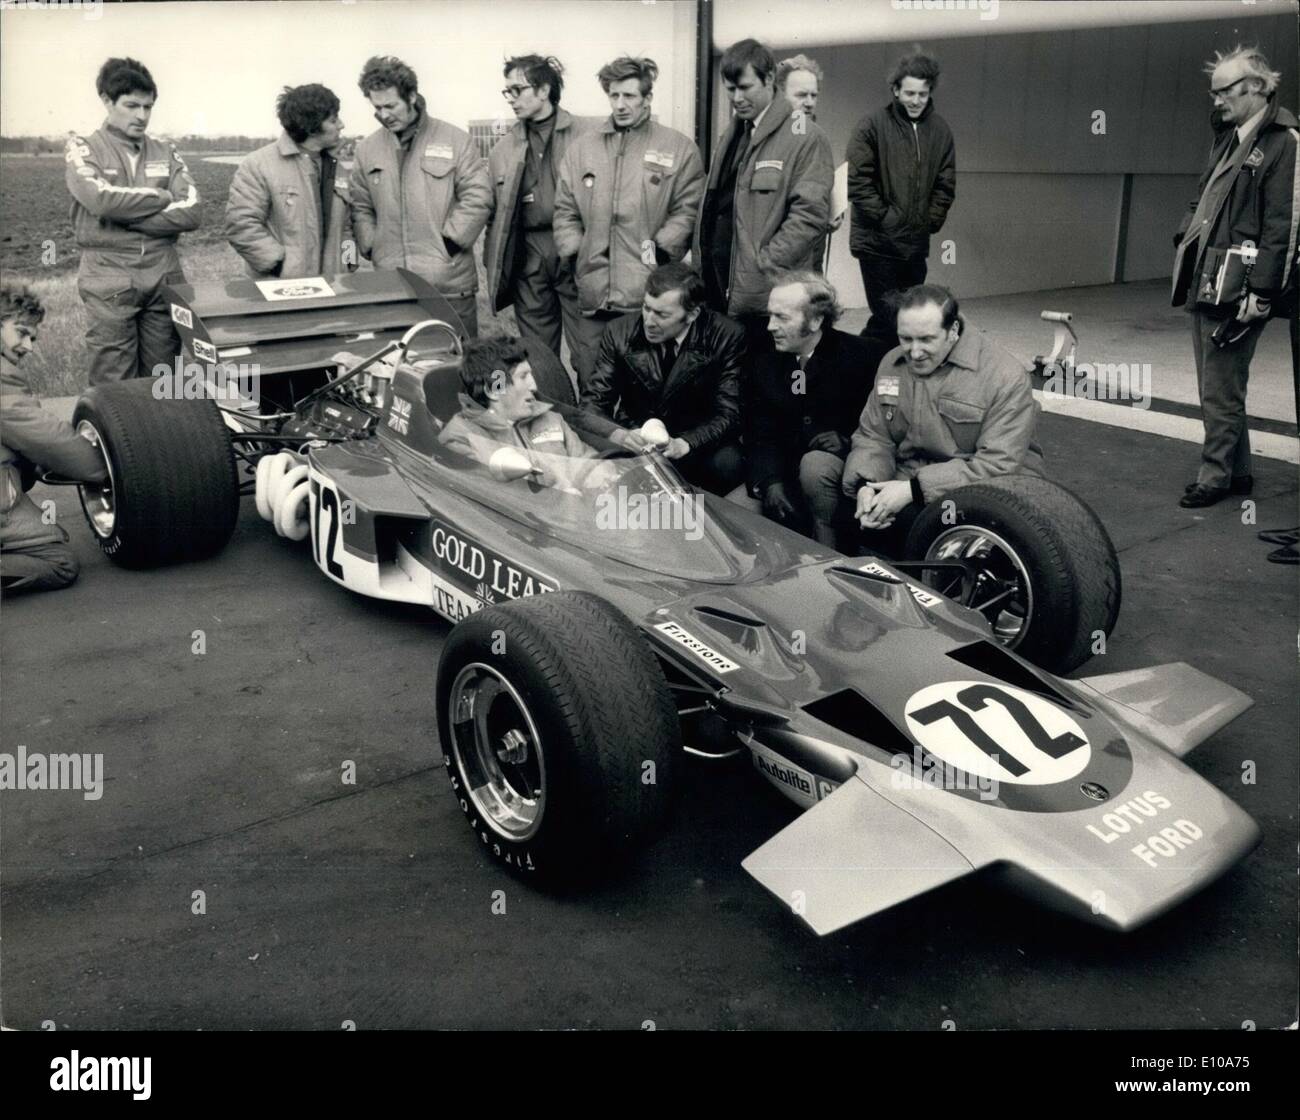 Apr. 04, 1970 - Lotus Unveil Their New 200 M.P.H. Grand Prix Racing Car - The Lotus 72. To contest World Constructors and Drivers Championship Honours during 1970. Team Lotus introduce their new contender, the Lotus 72. This is primarily the work of Maurice Phillippe, the chief designer for Team Lotus and represents a vast step forward in concept from previous Grand Prix cars Stock Photo